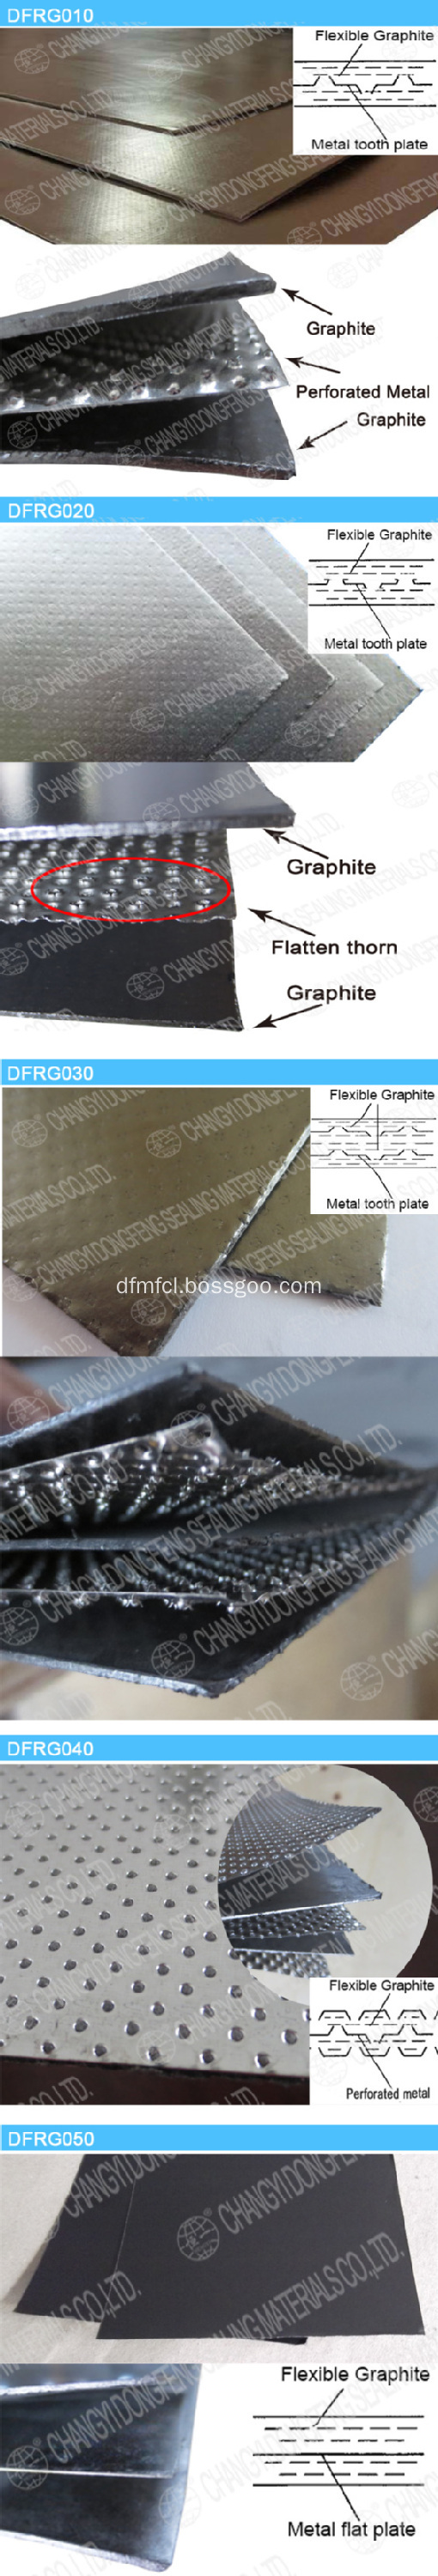 Reinforced Graphite Sheet Insert Perforated S.S304